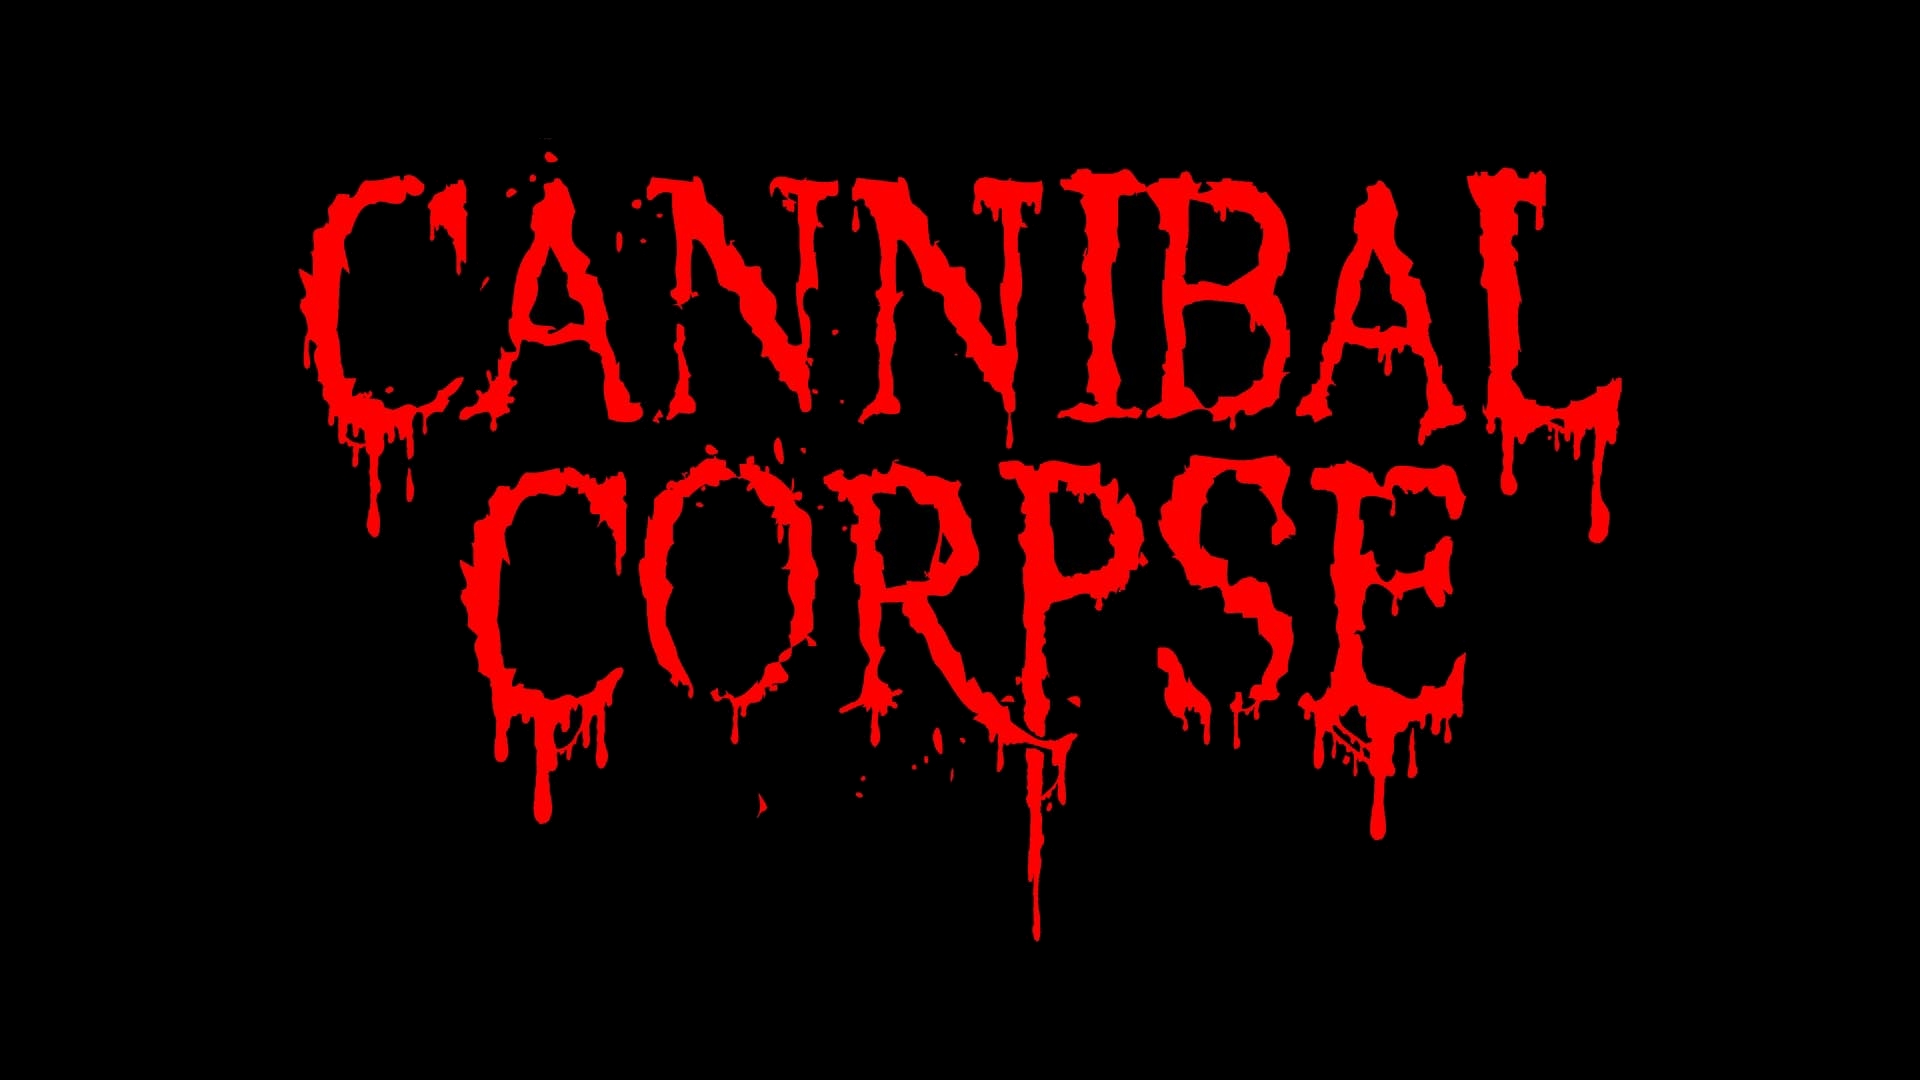 music, cannibal corpse images